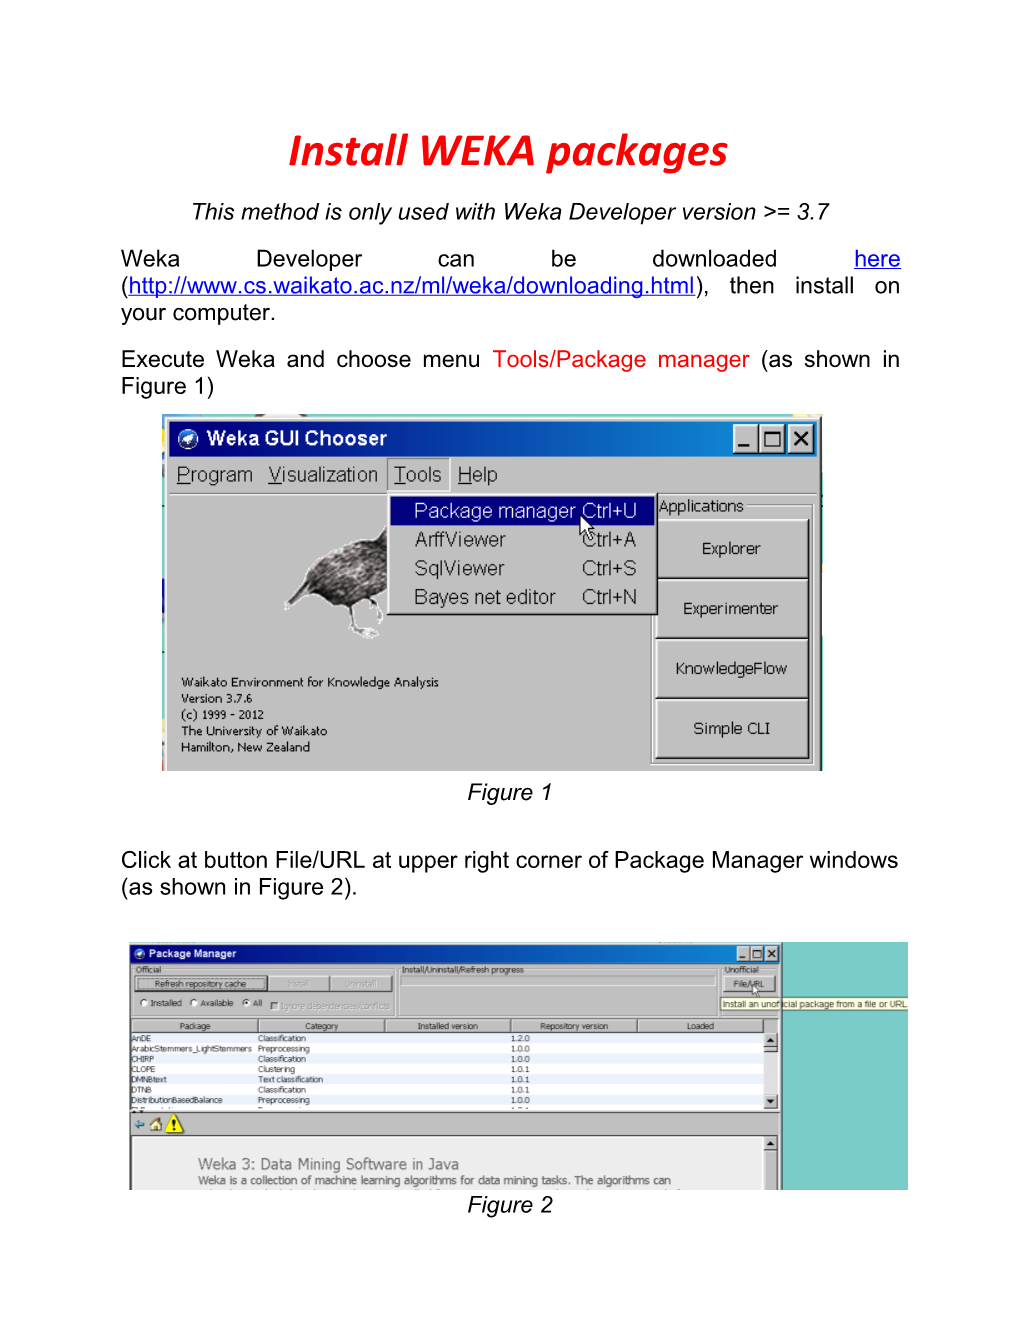 Install WEKA Packages